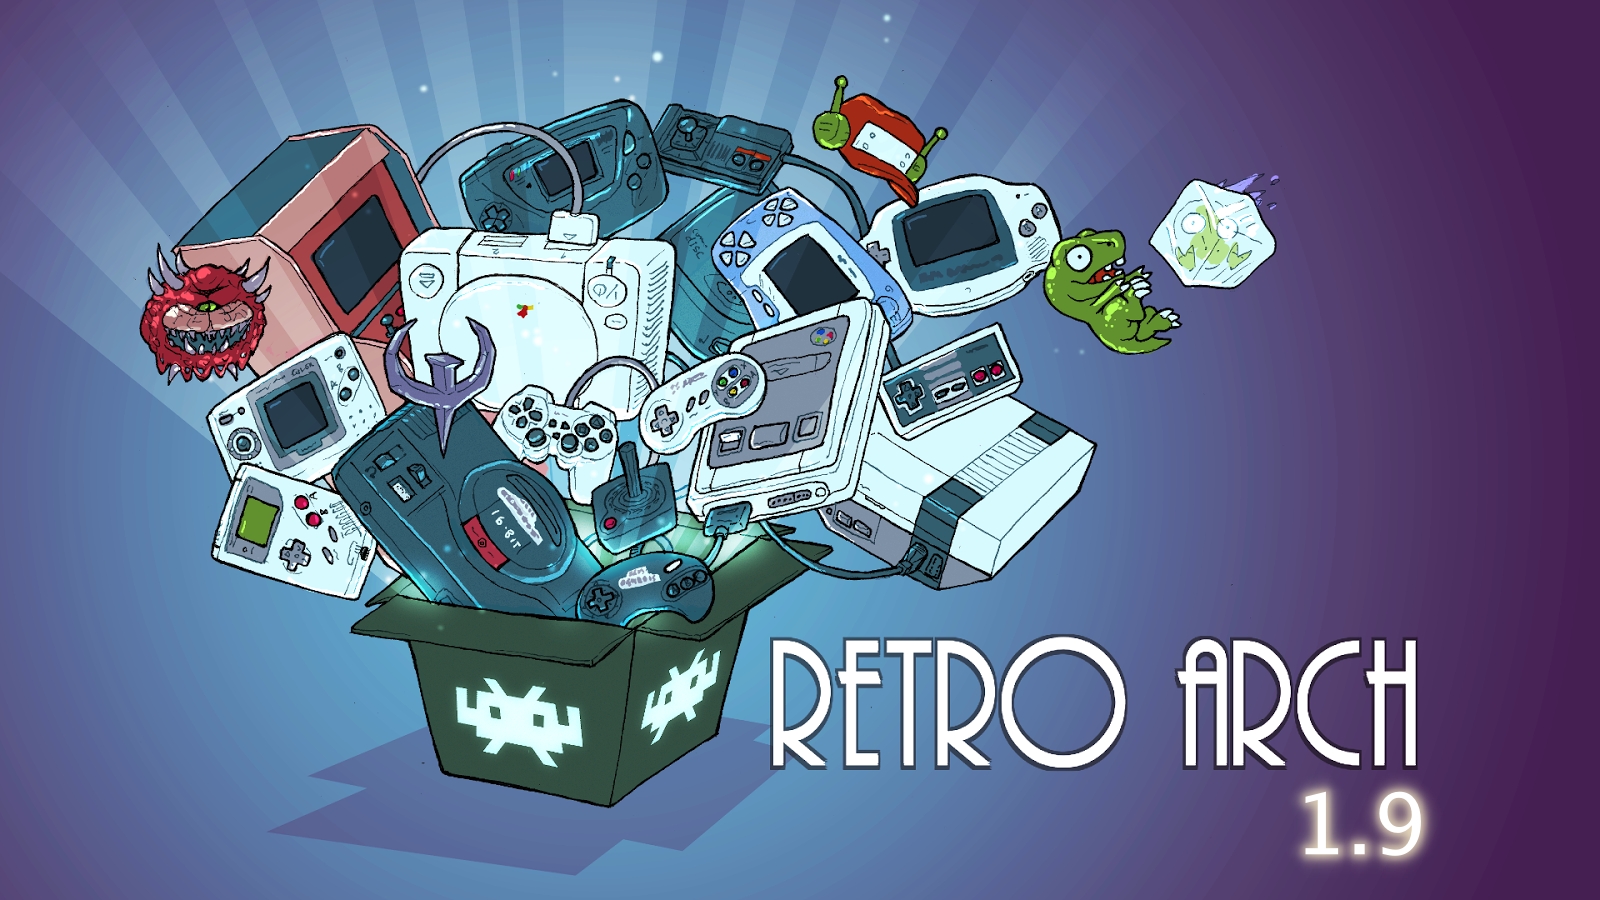 RetroArch 1.9 Released with Many Goodies for Retro Linux Gamers